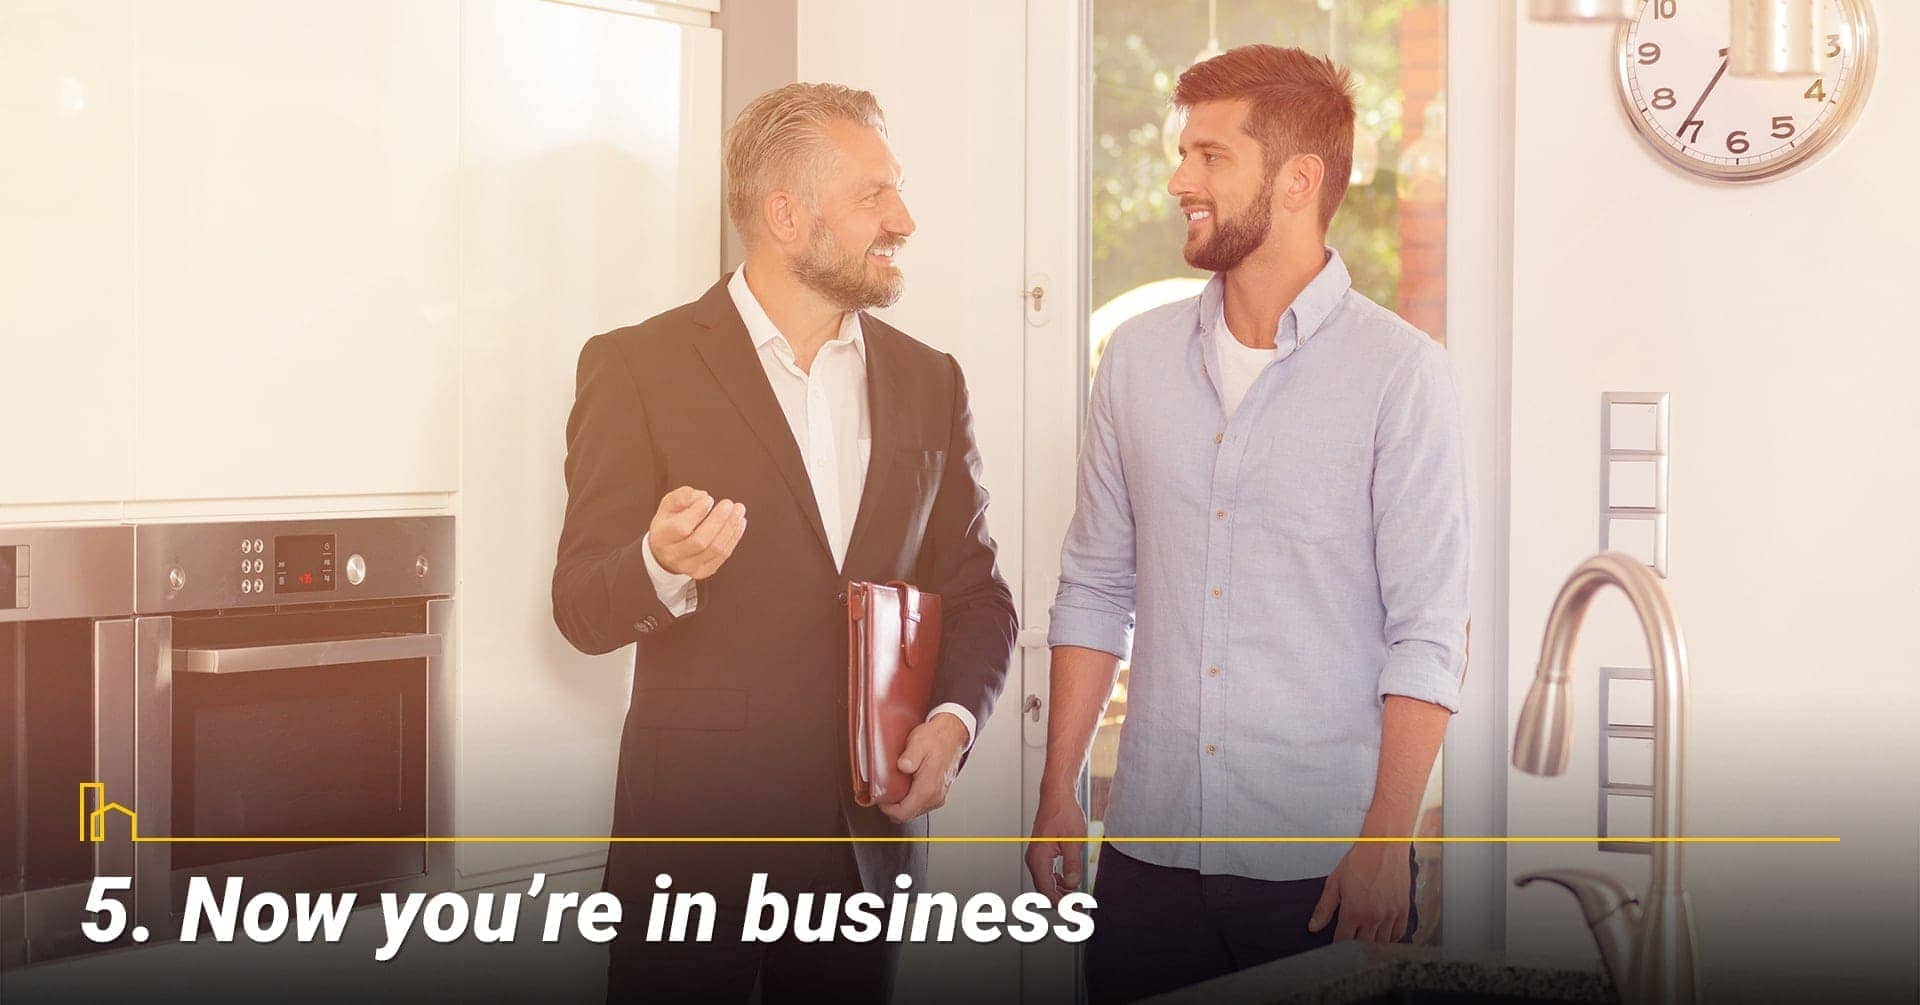 Now you’re in business, treat your rental property as a business